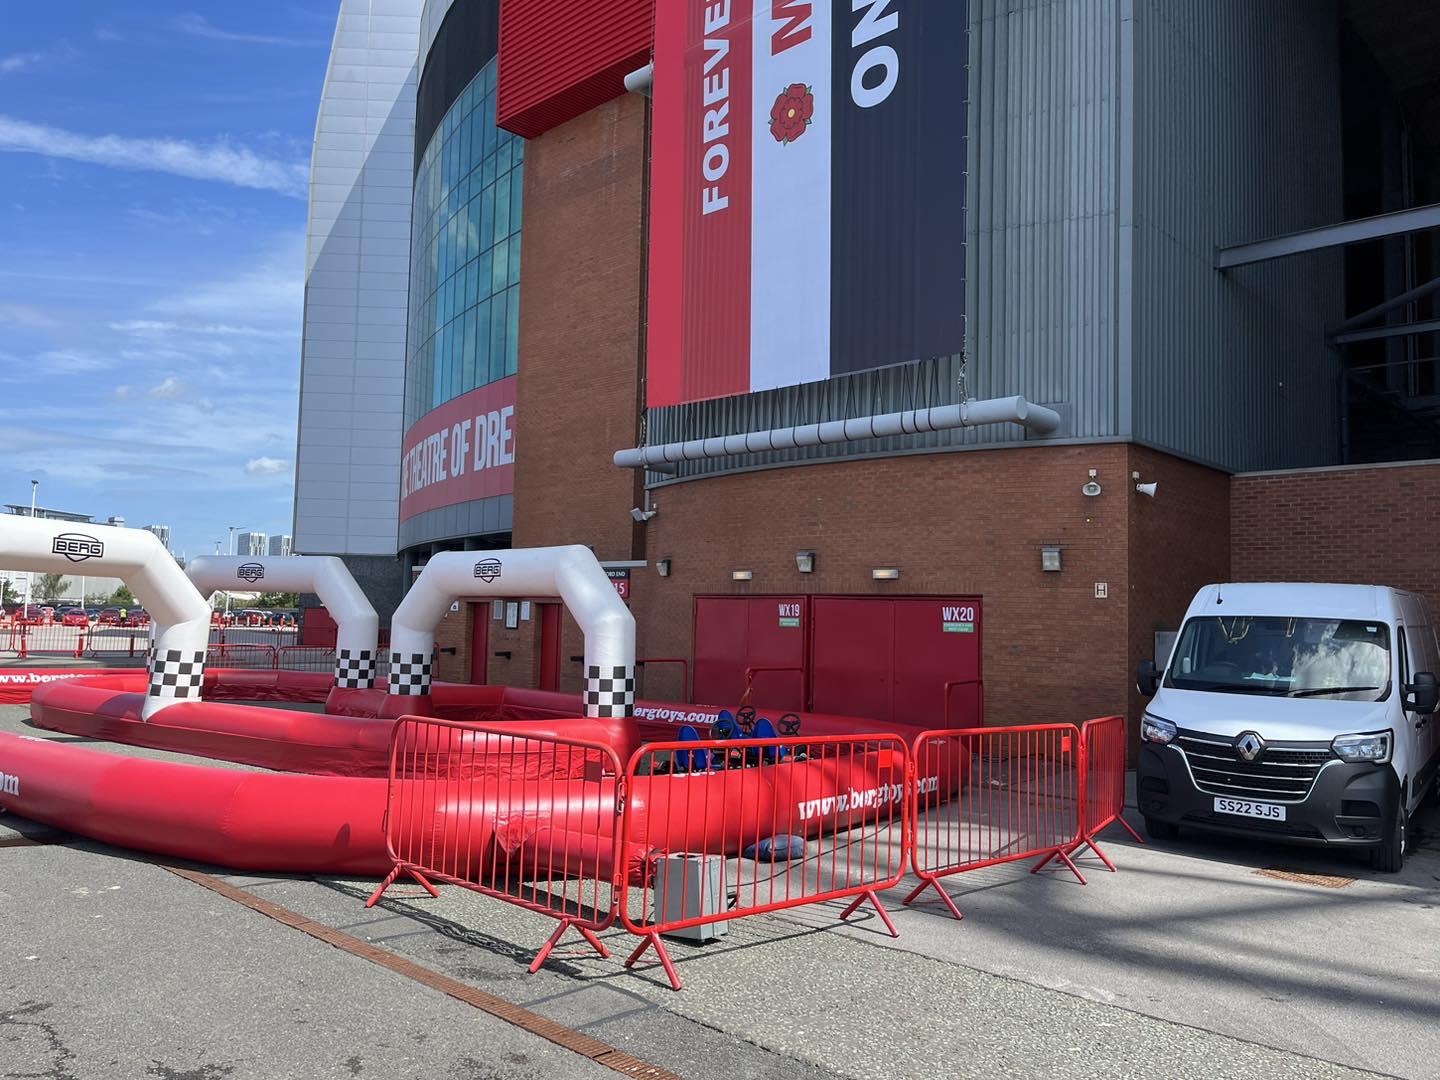 This image shows pedal go karts and track on hire at Old Trafford, Manchester